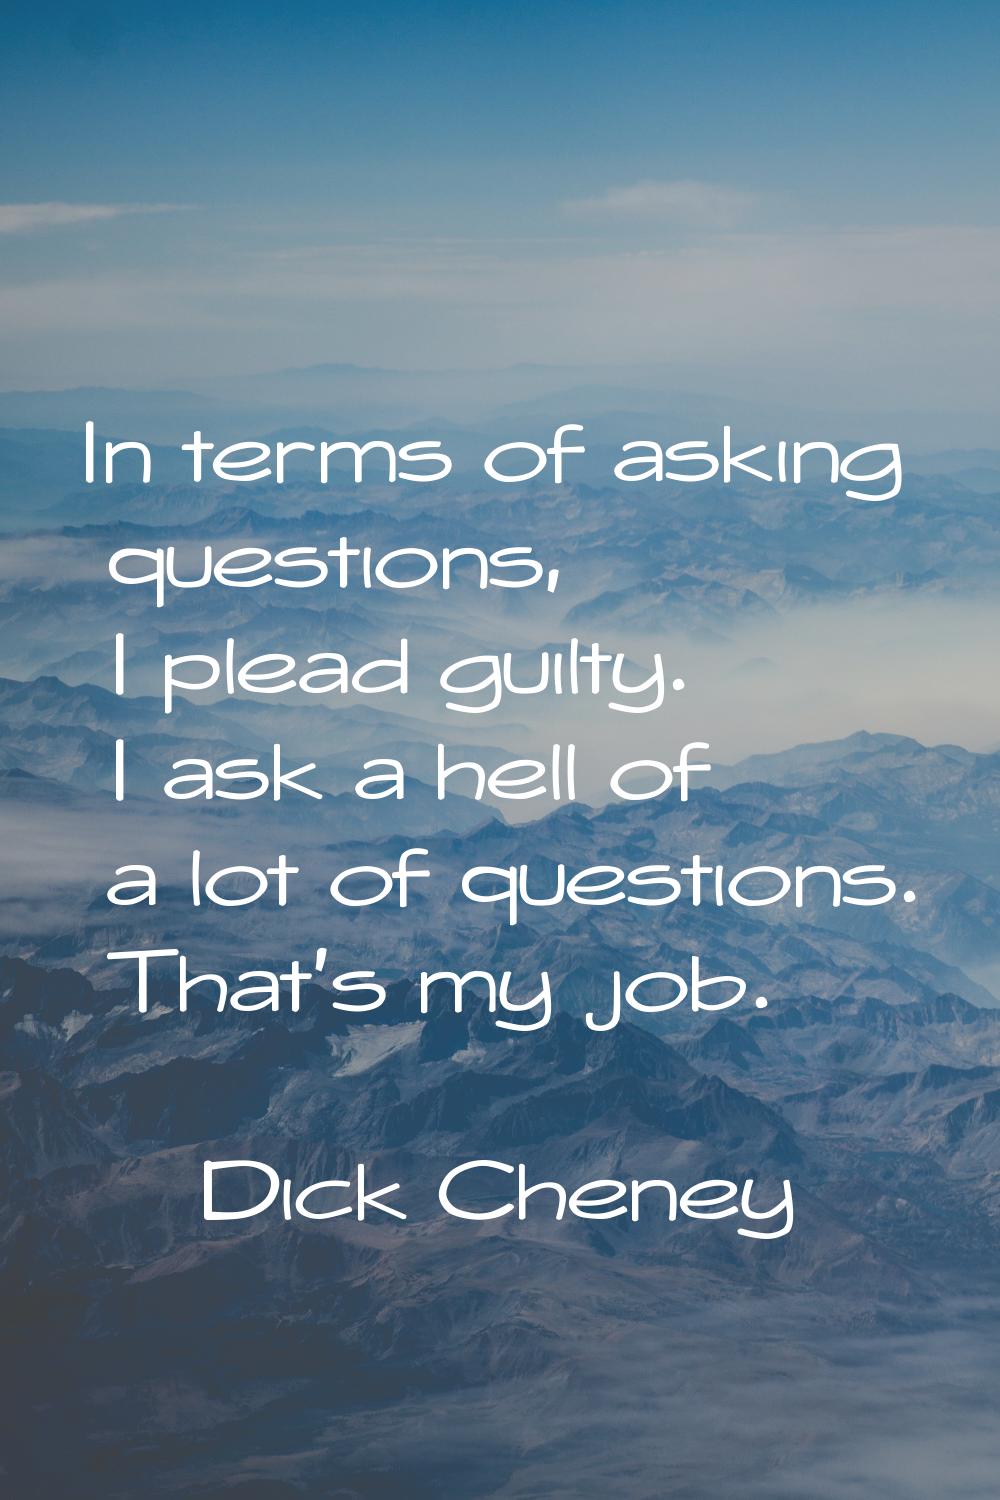 In terms of asking questions, I plead guilty. I ask a hell of a lot of questions. That's my job.